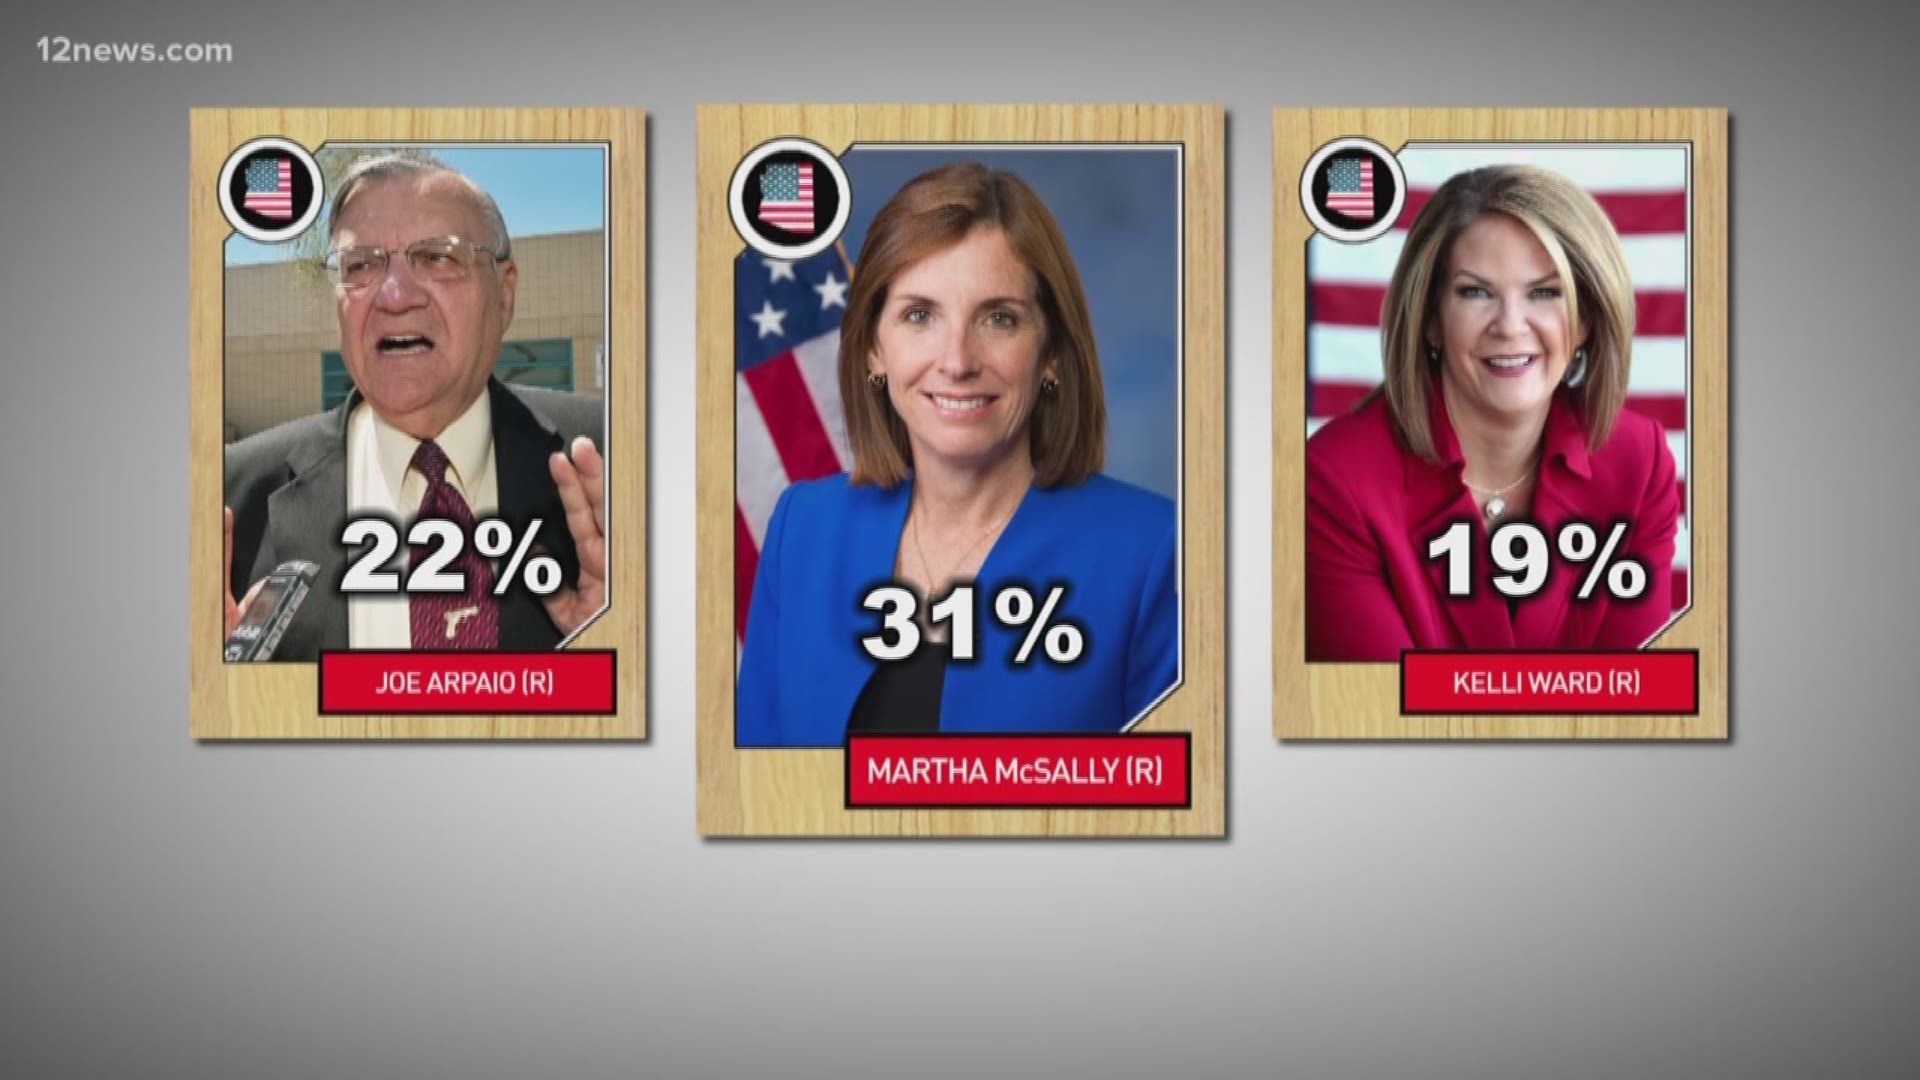 Data Orbital consulting firm released its latest poll showing Tucson Congresswoman Martha McSally leading the GOP Republican primary for U.S. Senate.